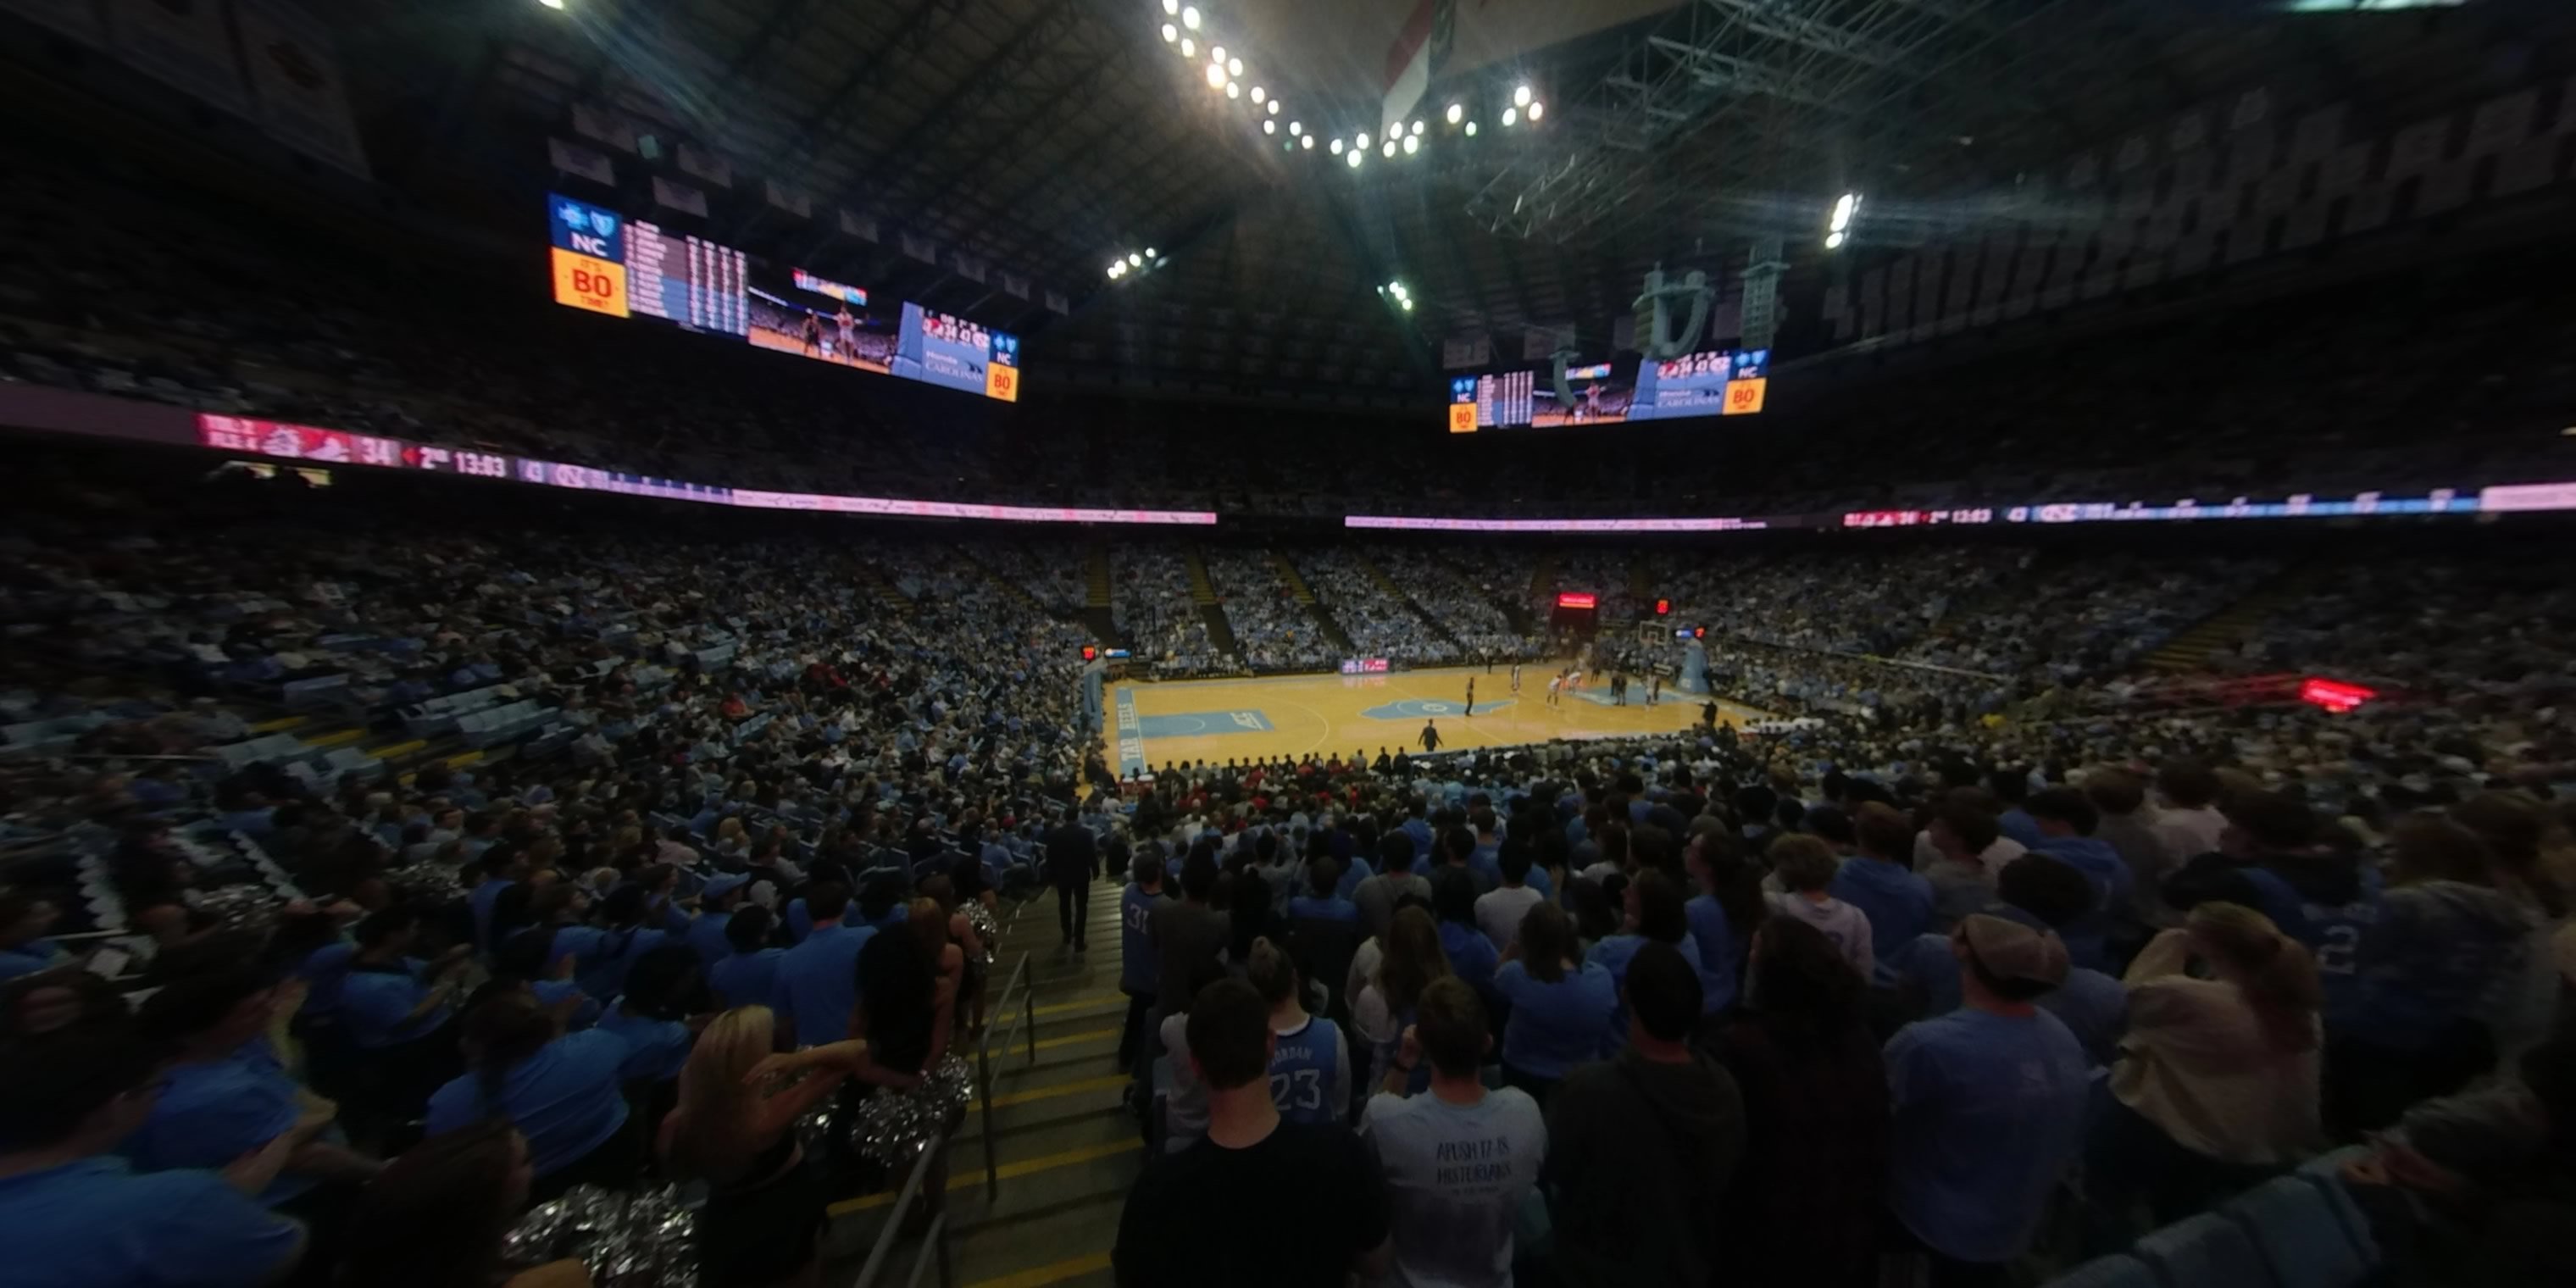 section 106 panoramic seat view  - dean smith center